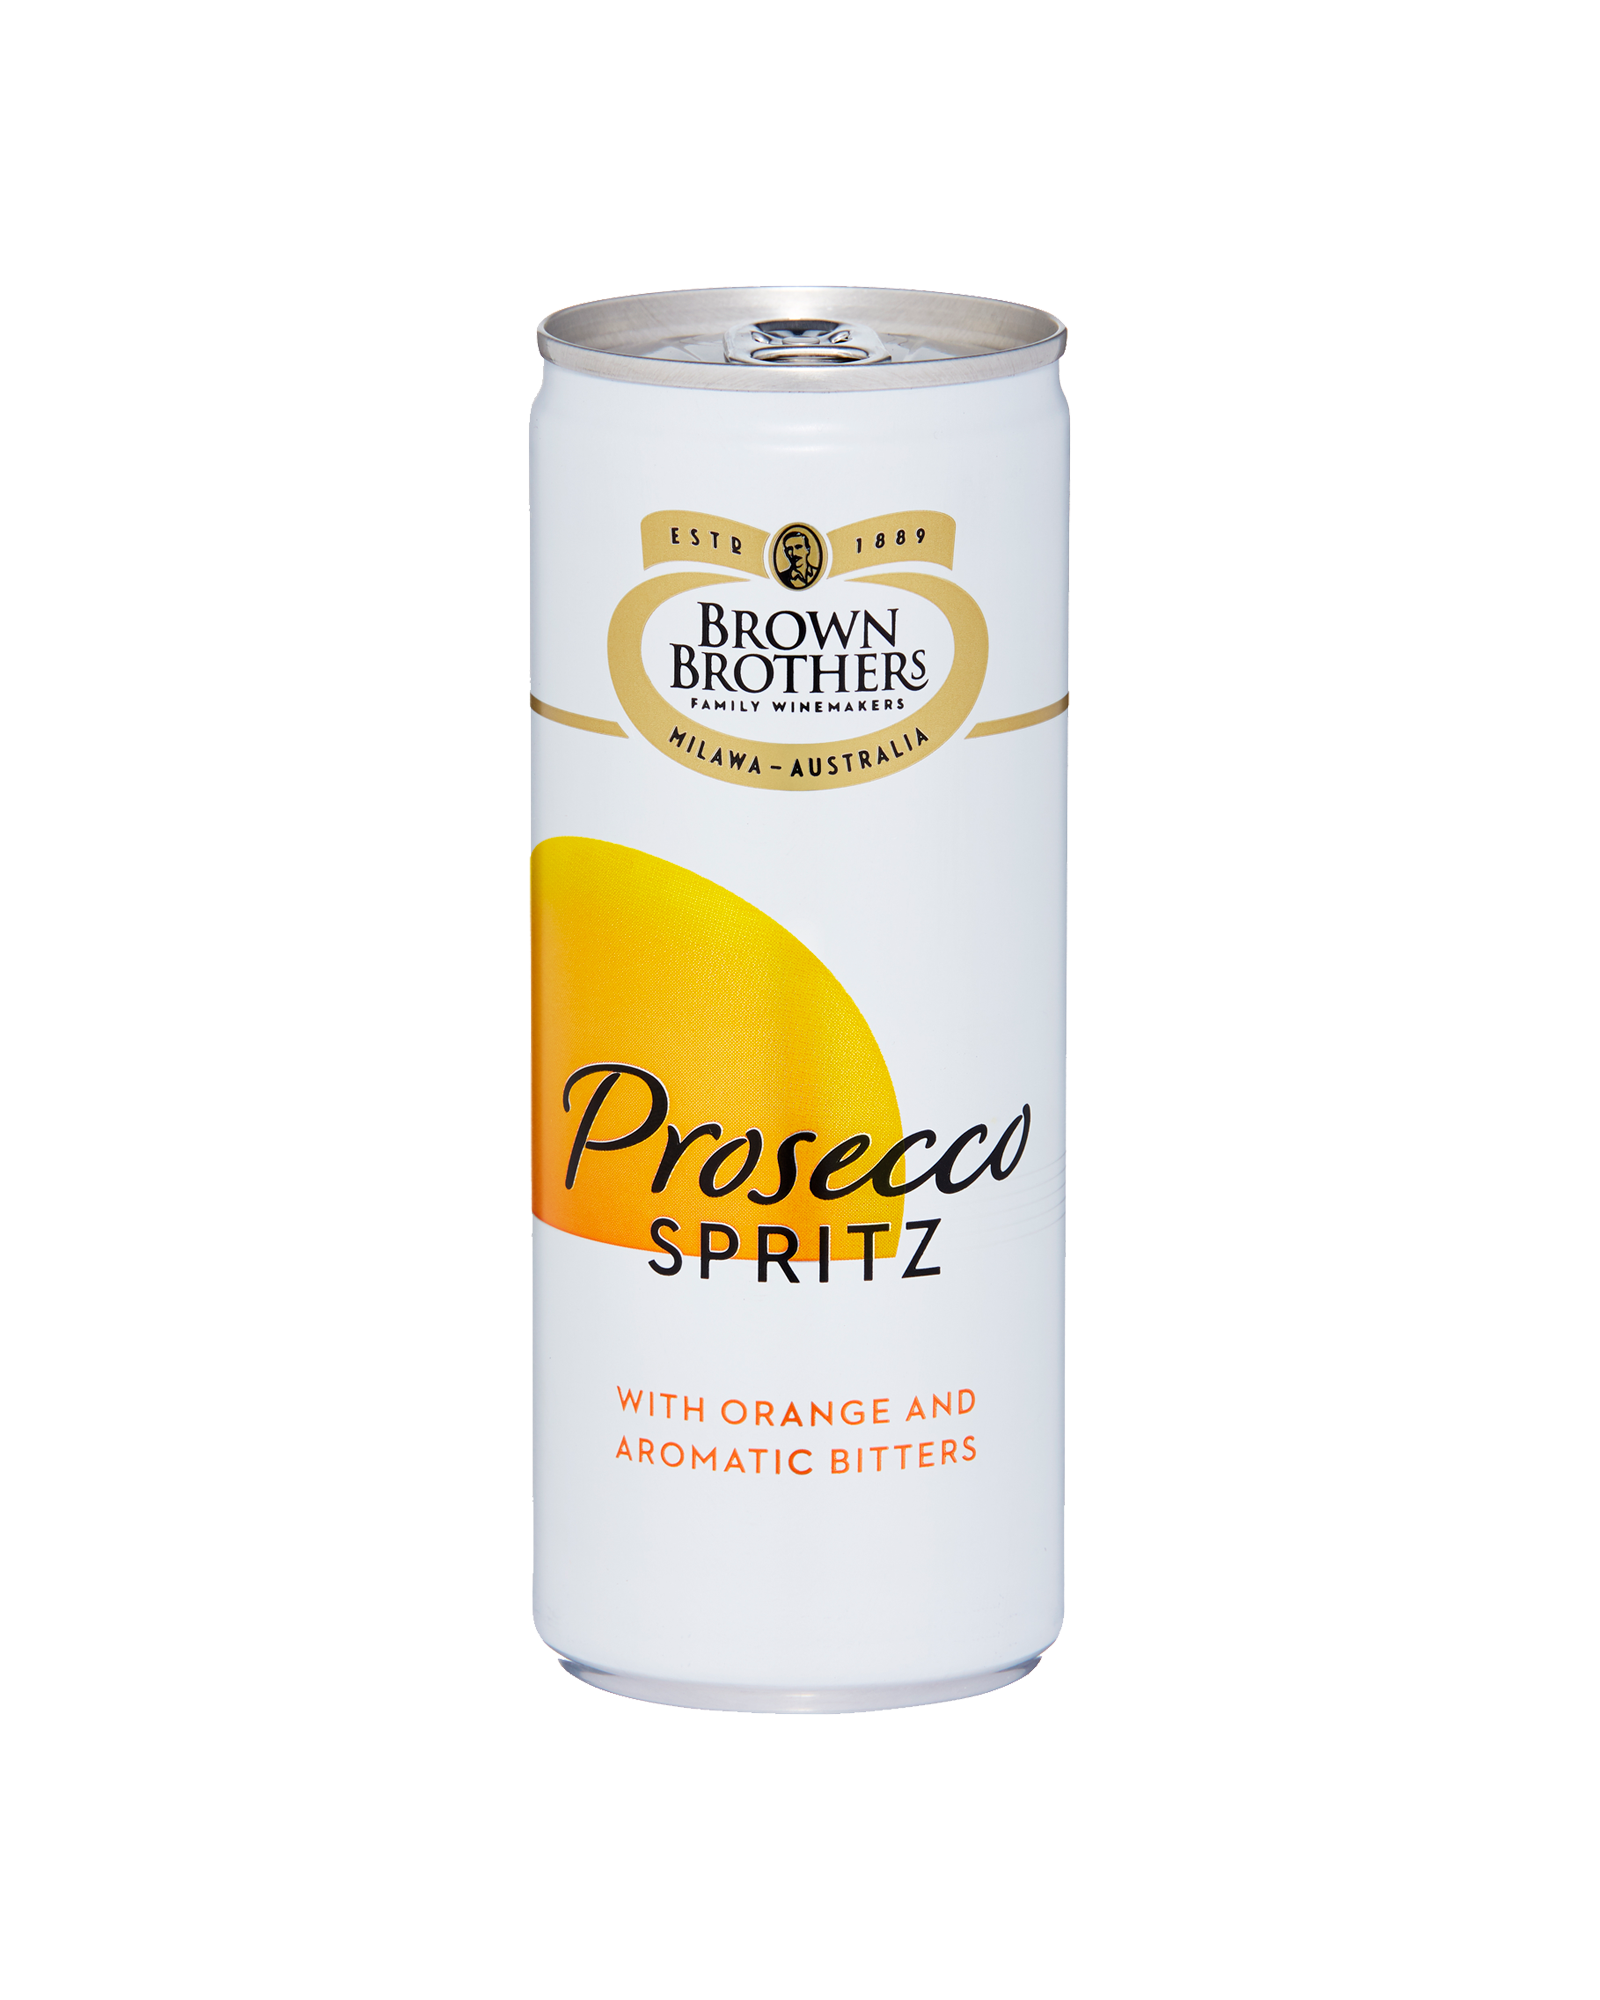 Brown Brothers Prosecco Spritz 250mL